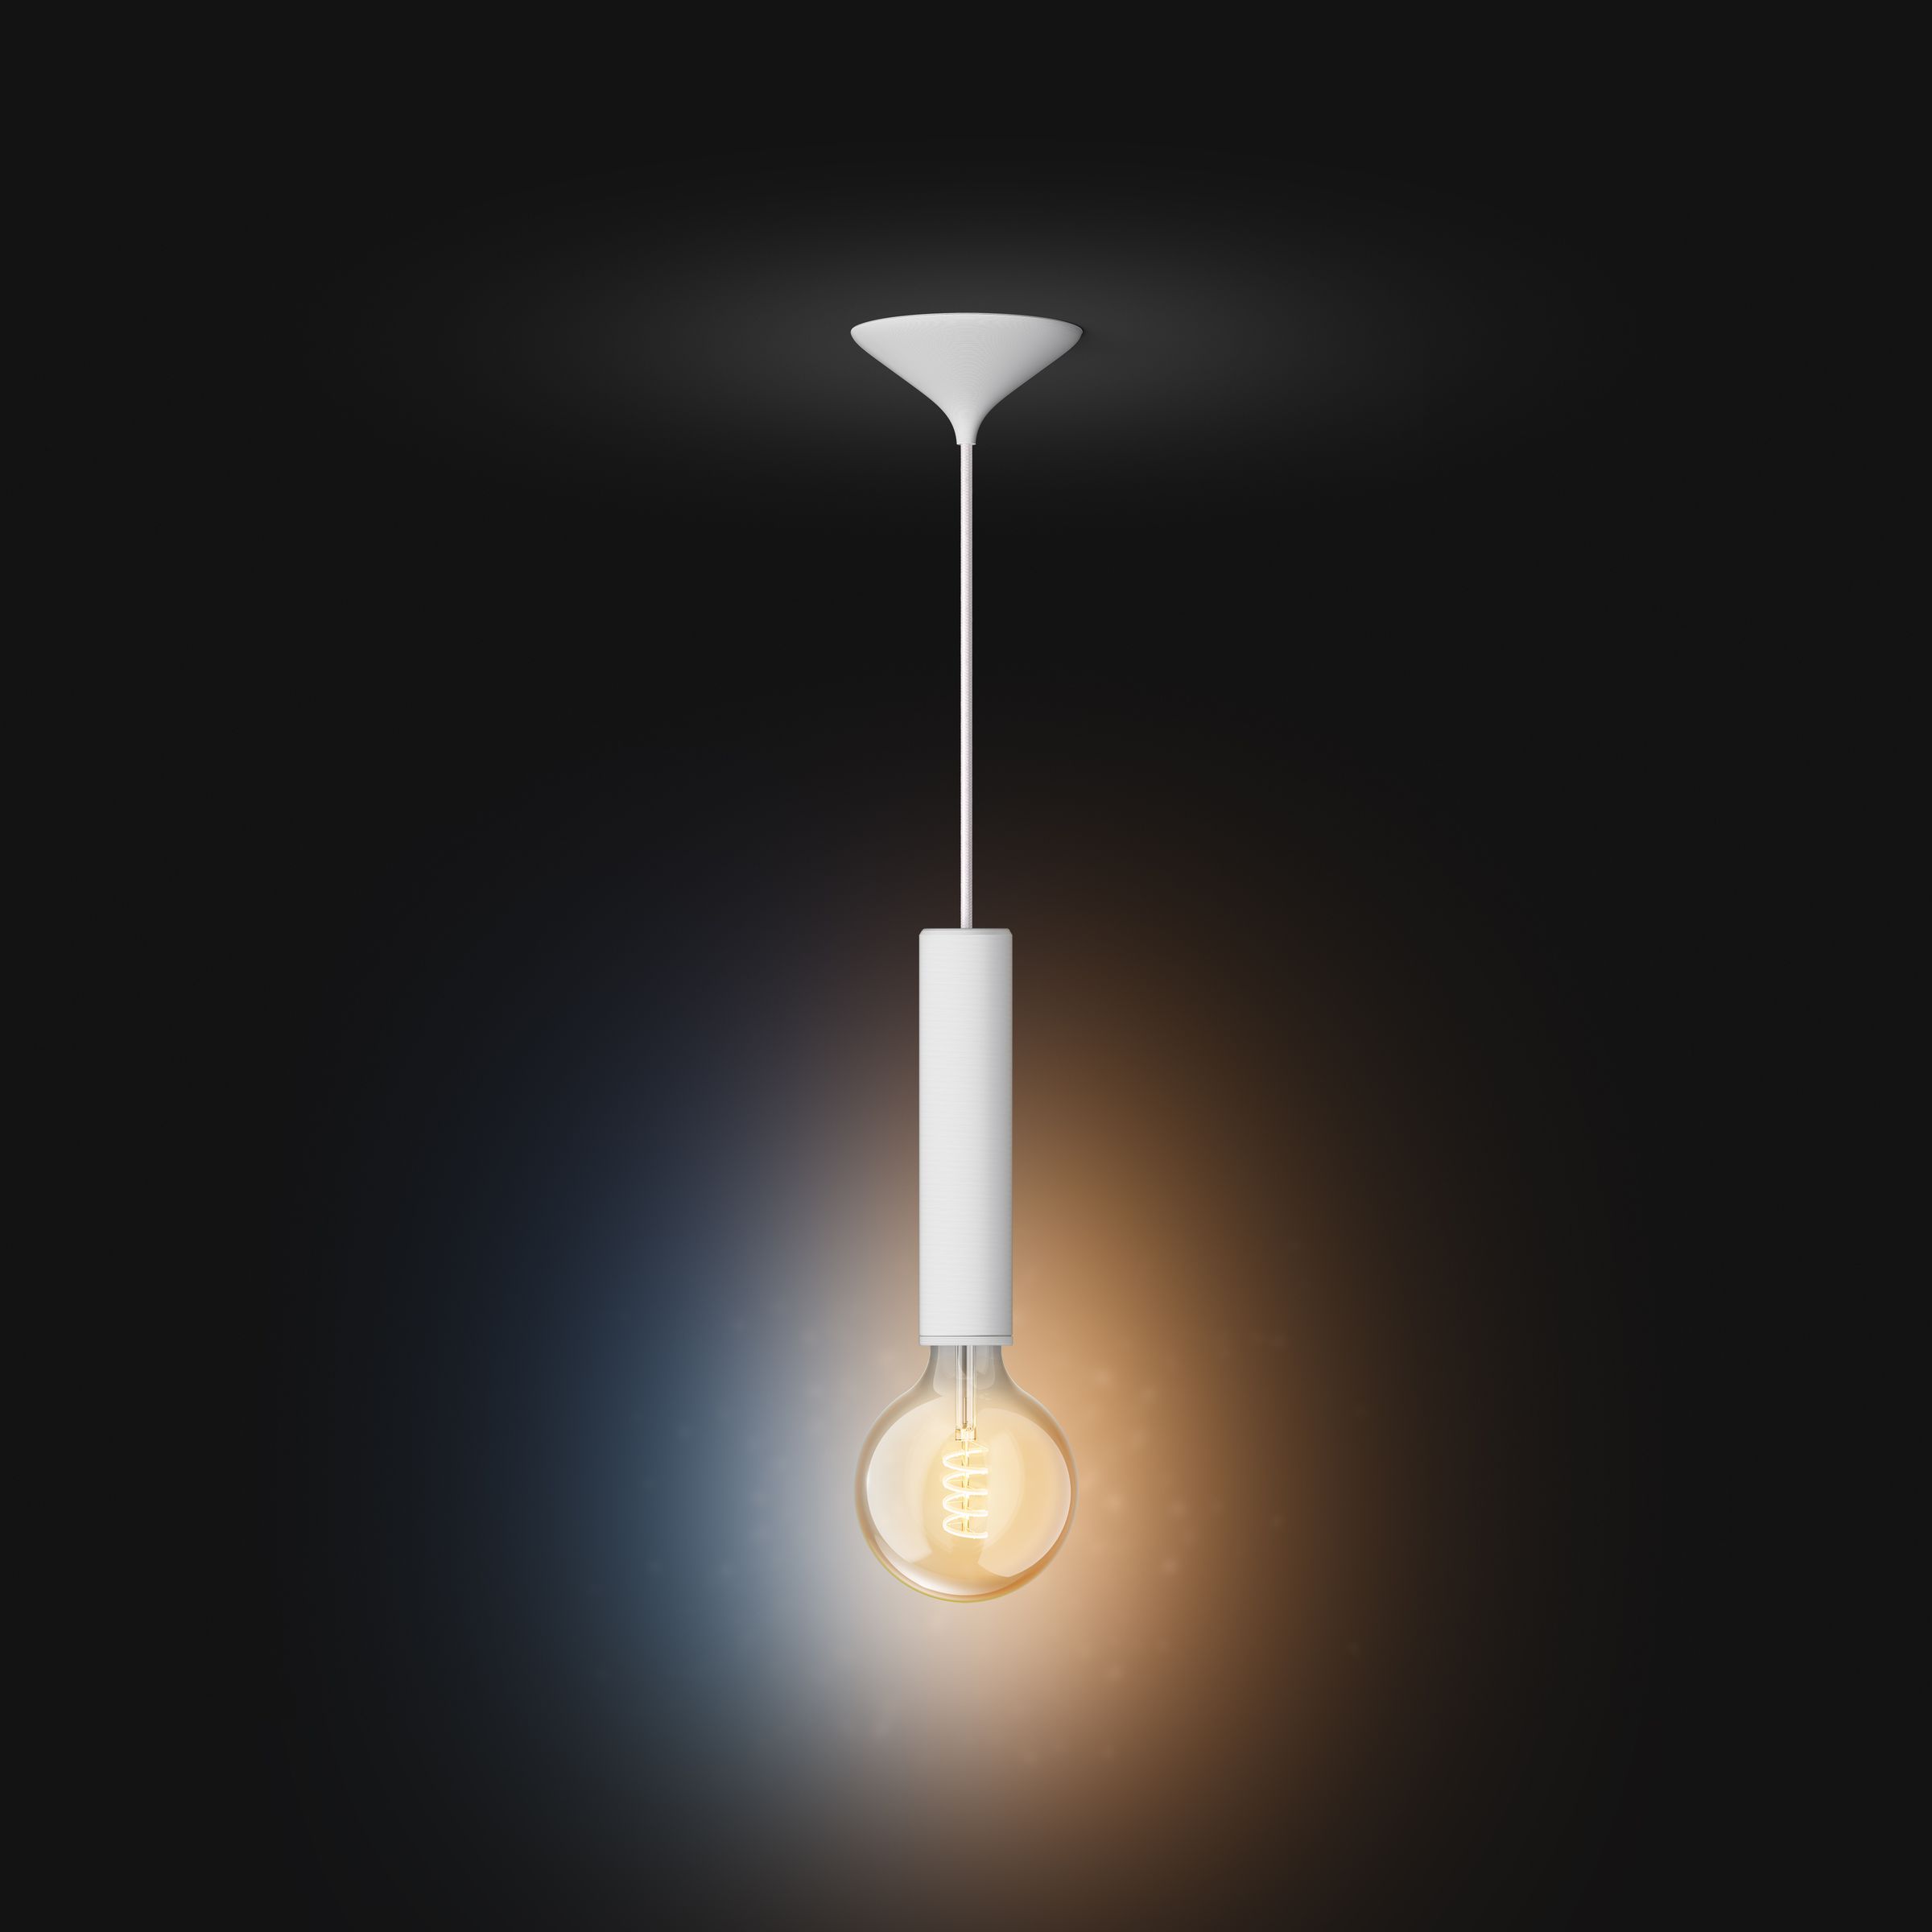 <em>Philips Hue pendant cord in black or white for Filament bulbs (available February 2024 in EU - excluding UK) €59.99 (size M) / €69.99 (size L).</em>